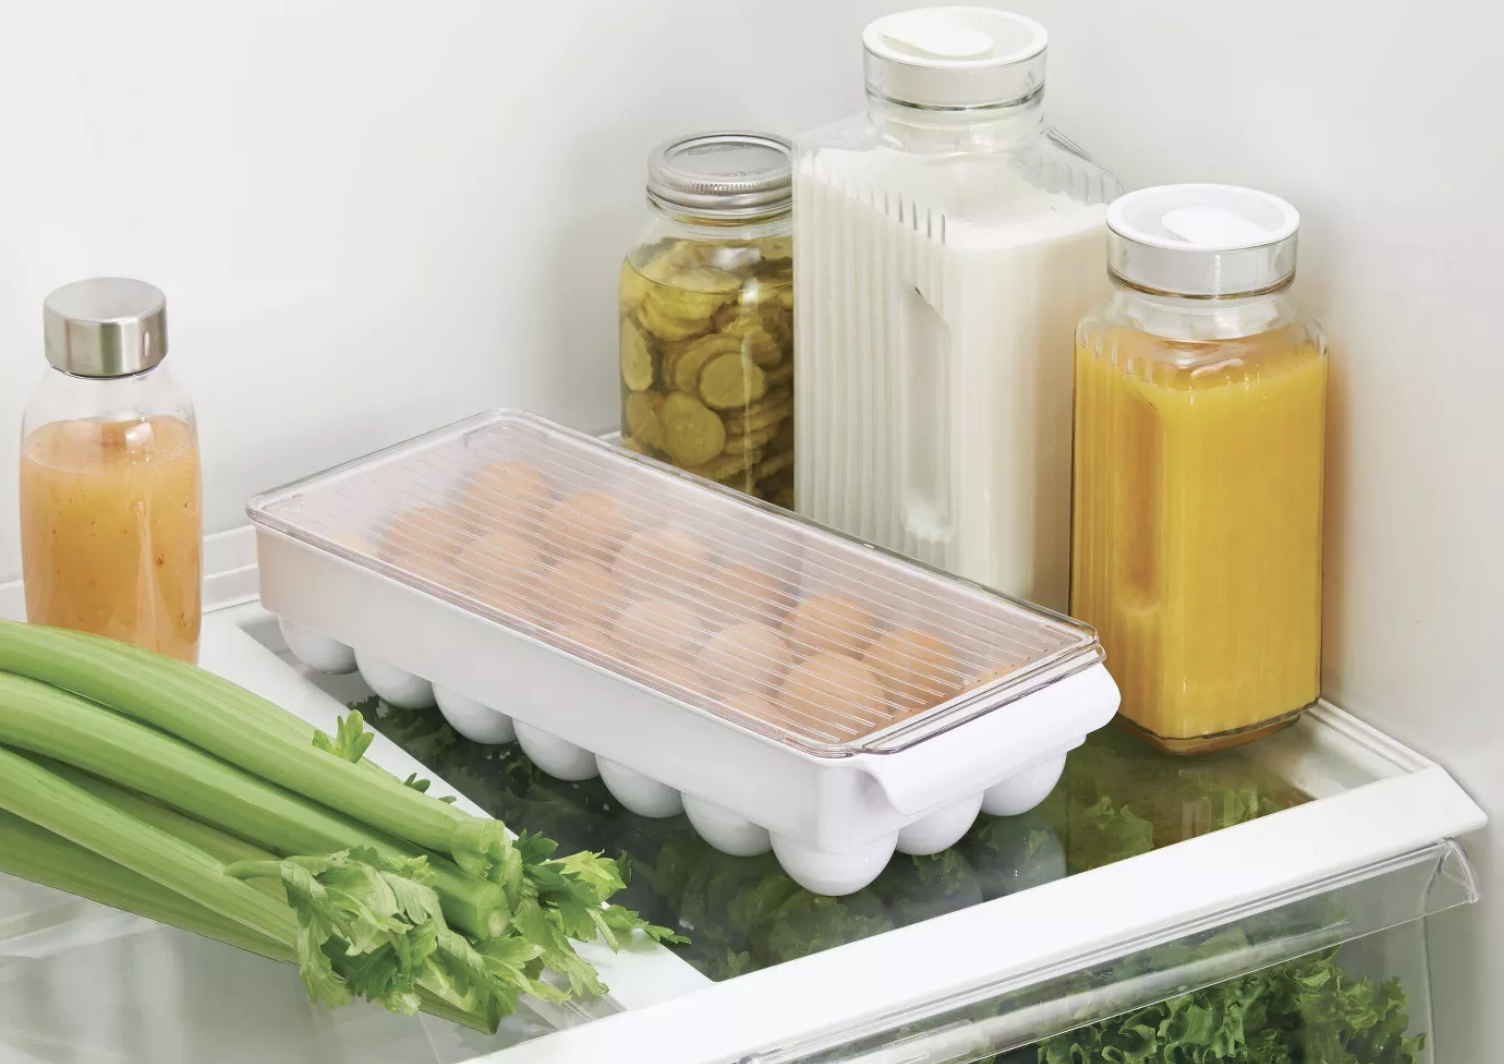 the egg organizer in a fridge surrounded by produce and drinks